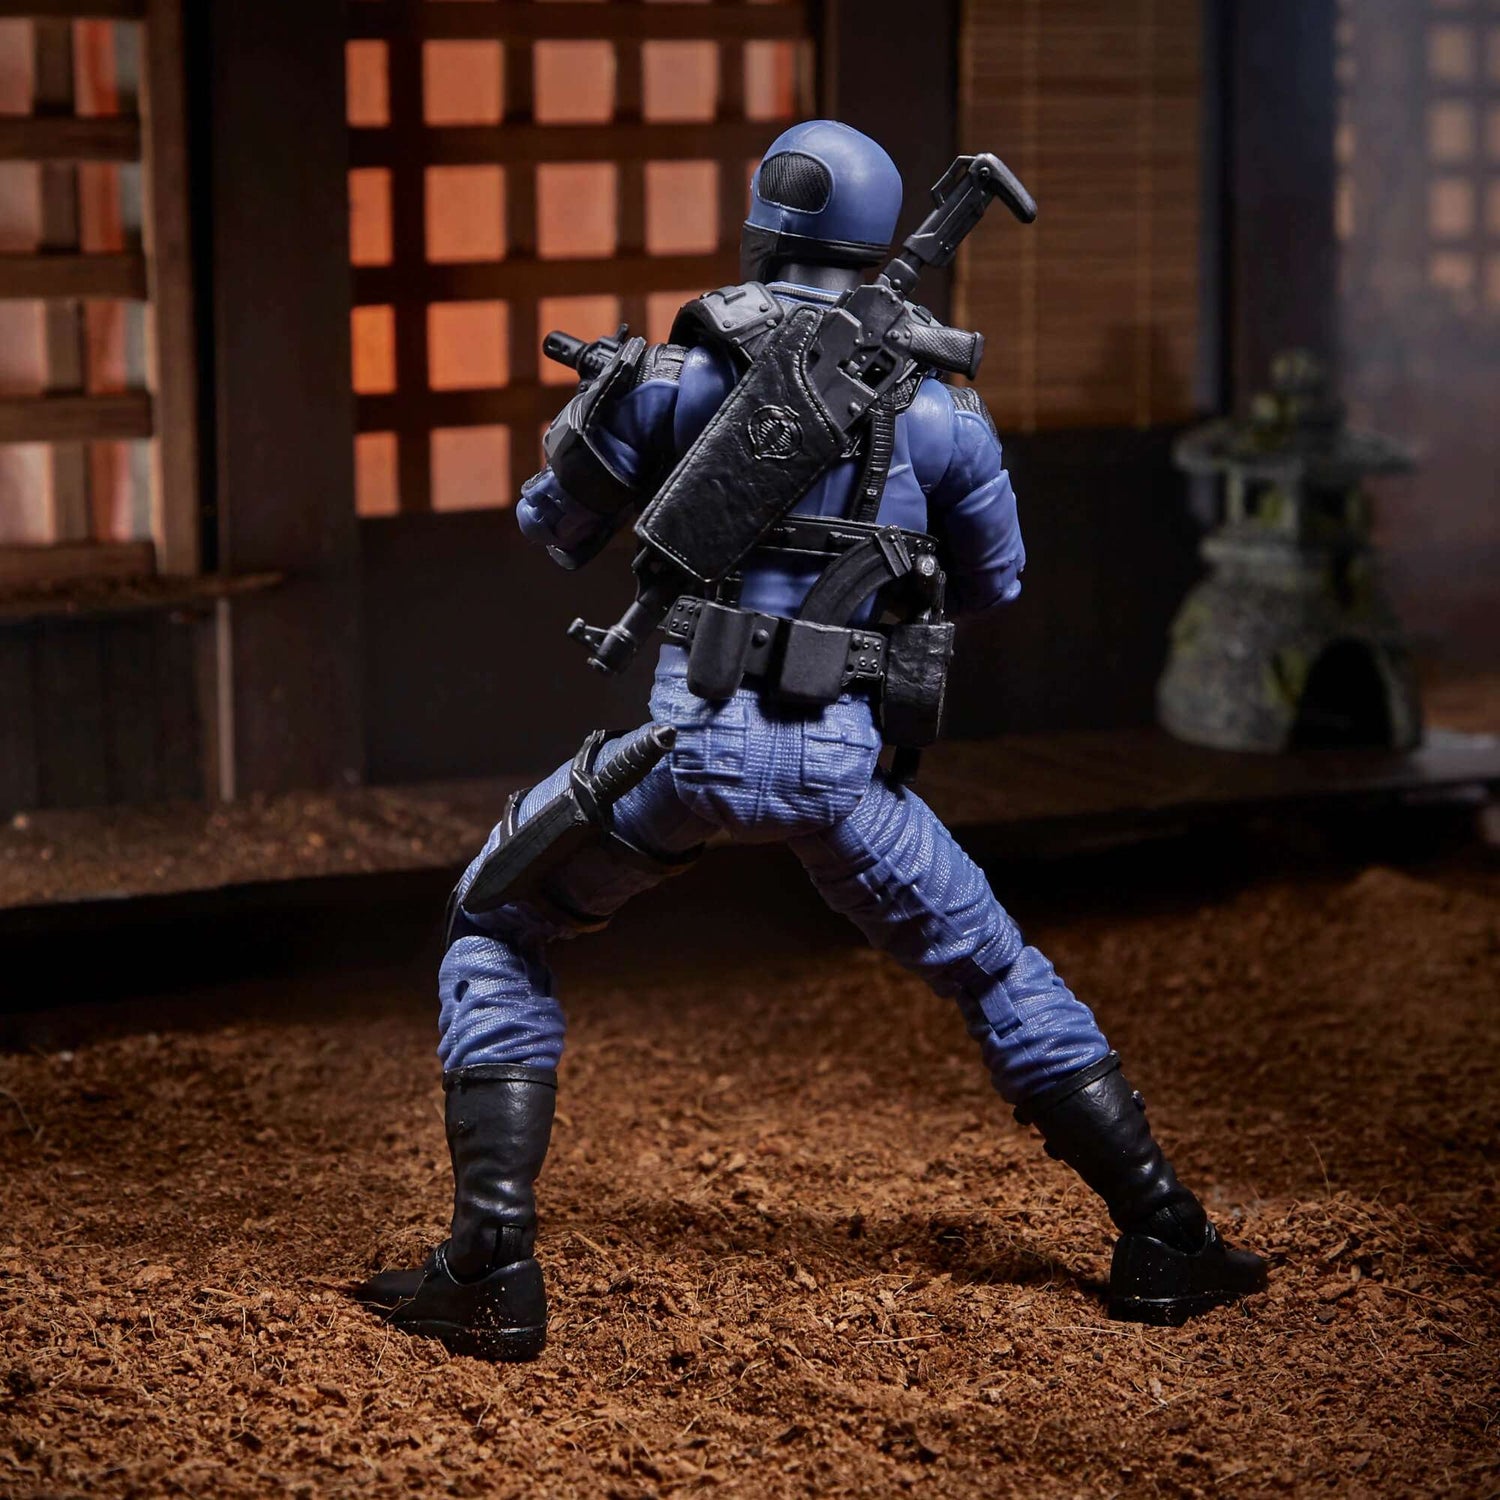 Hasbro G.I. Joe Classified Series Cobra Officer action figure with accessories